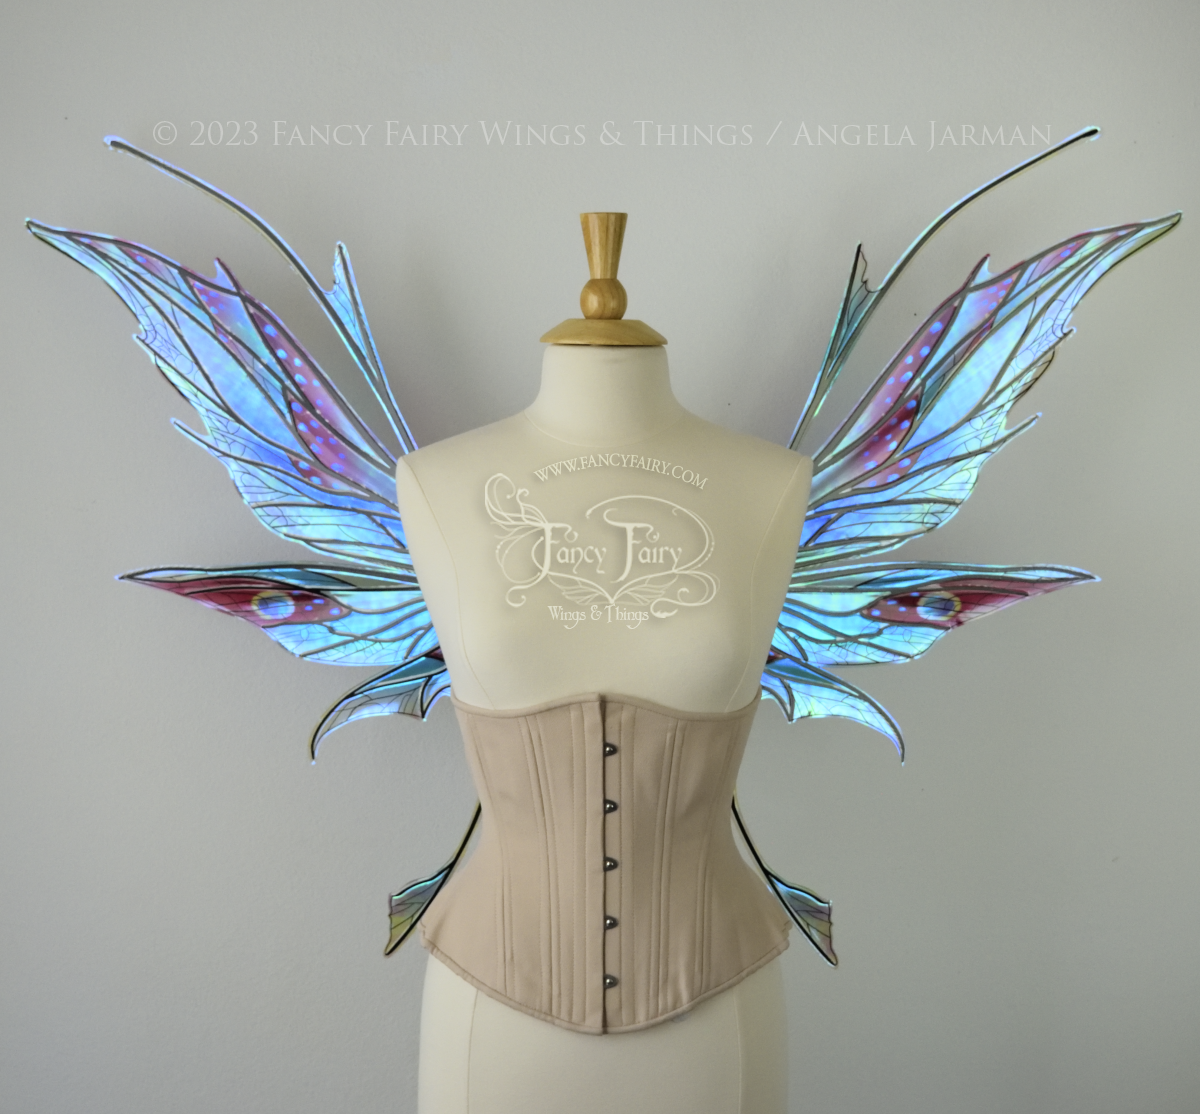 Front view of a dress form wearing an underbust corset & large blue / burgundy / green painted iridescent fairy wings with antennae, black veins, spikey shapes